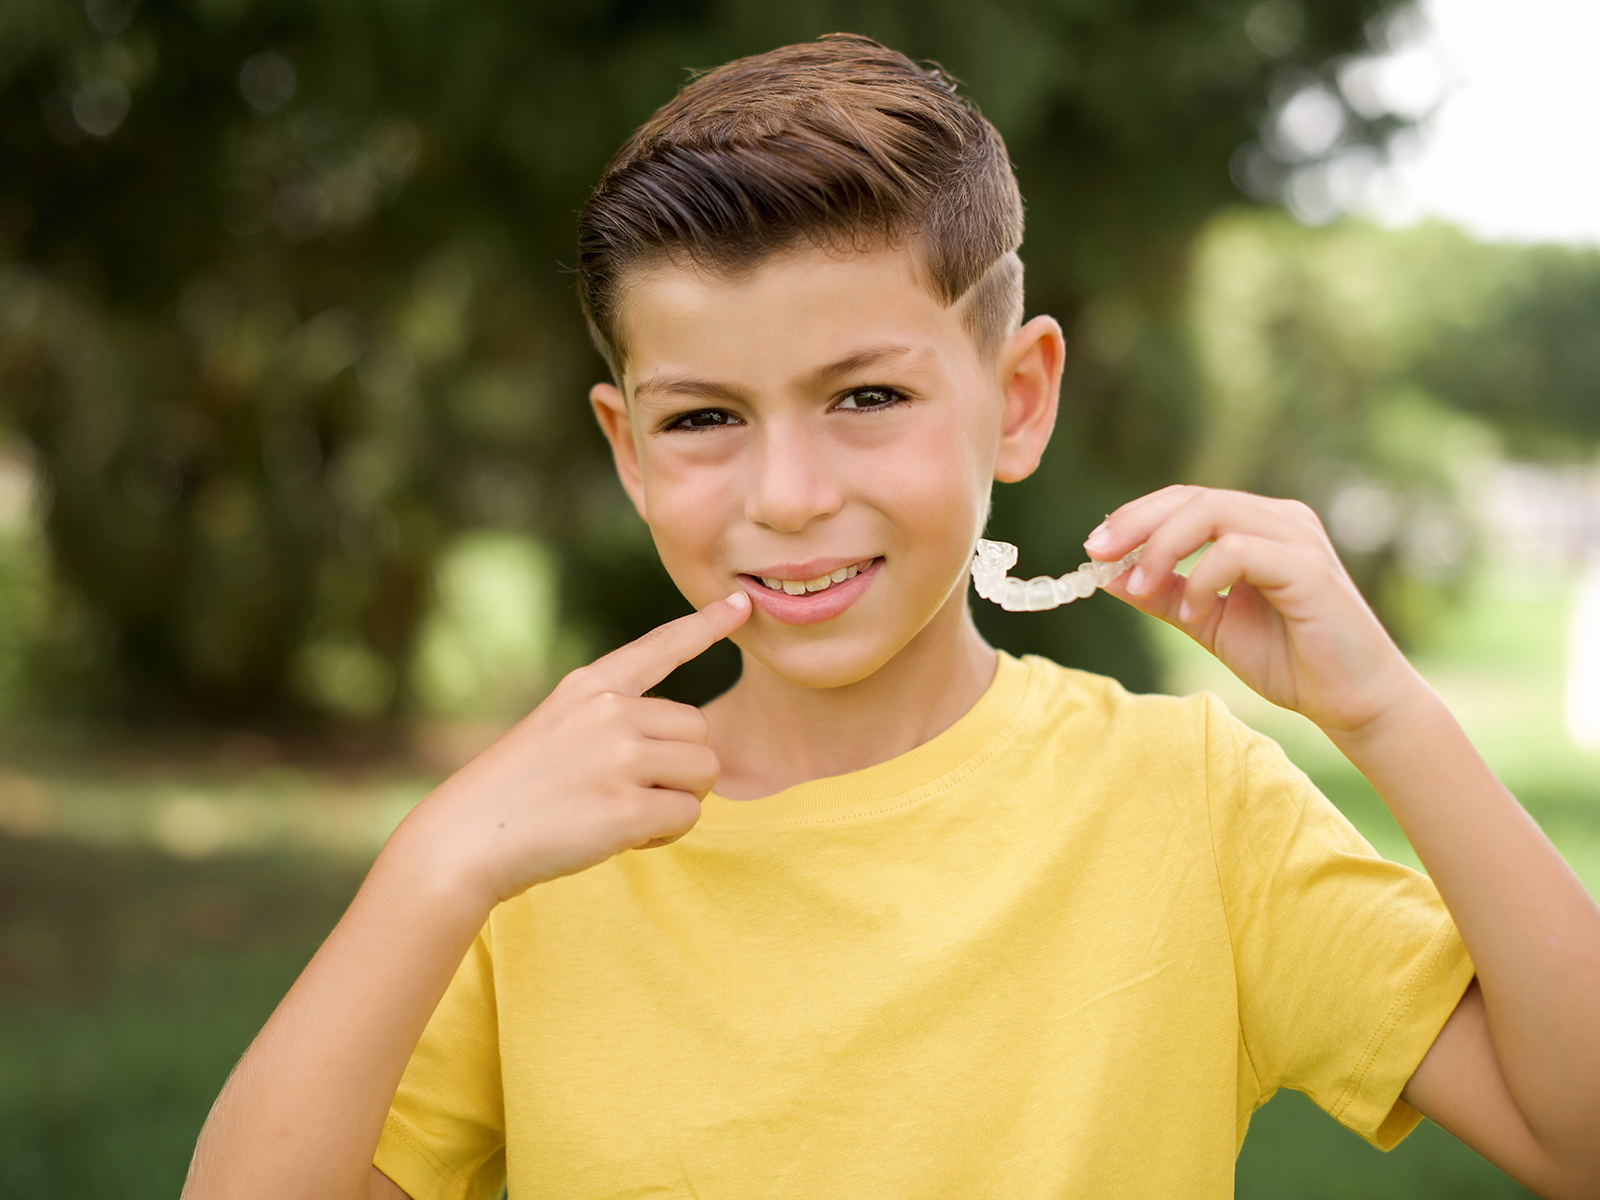 Is Invisalign A Good Option For Kids?